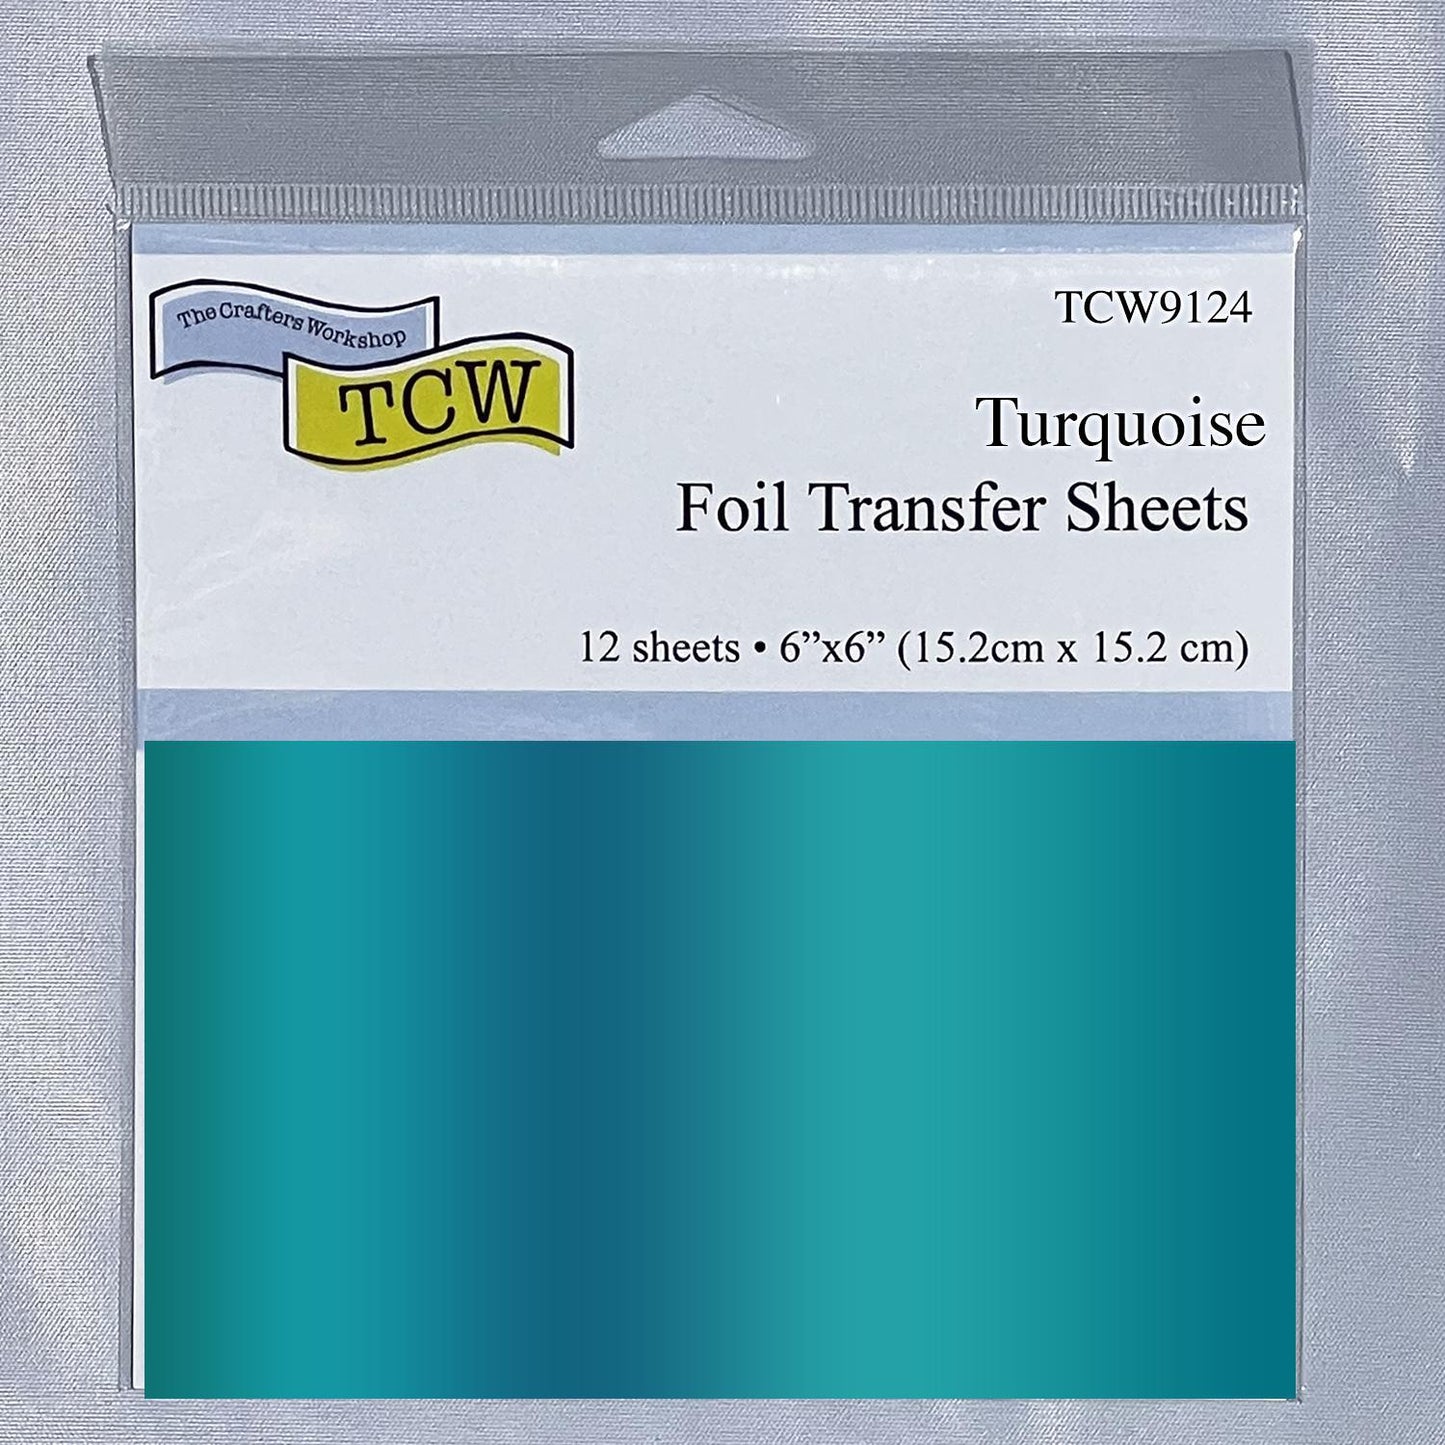 TCW9100 Foil Transfer Sheets 6x6 - Turquoise